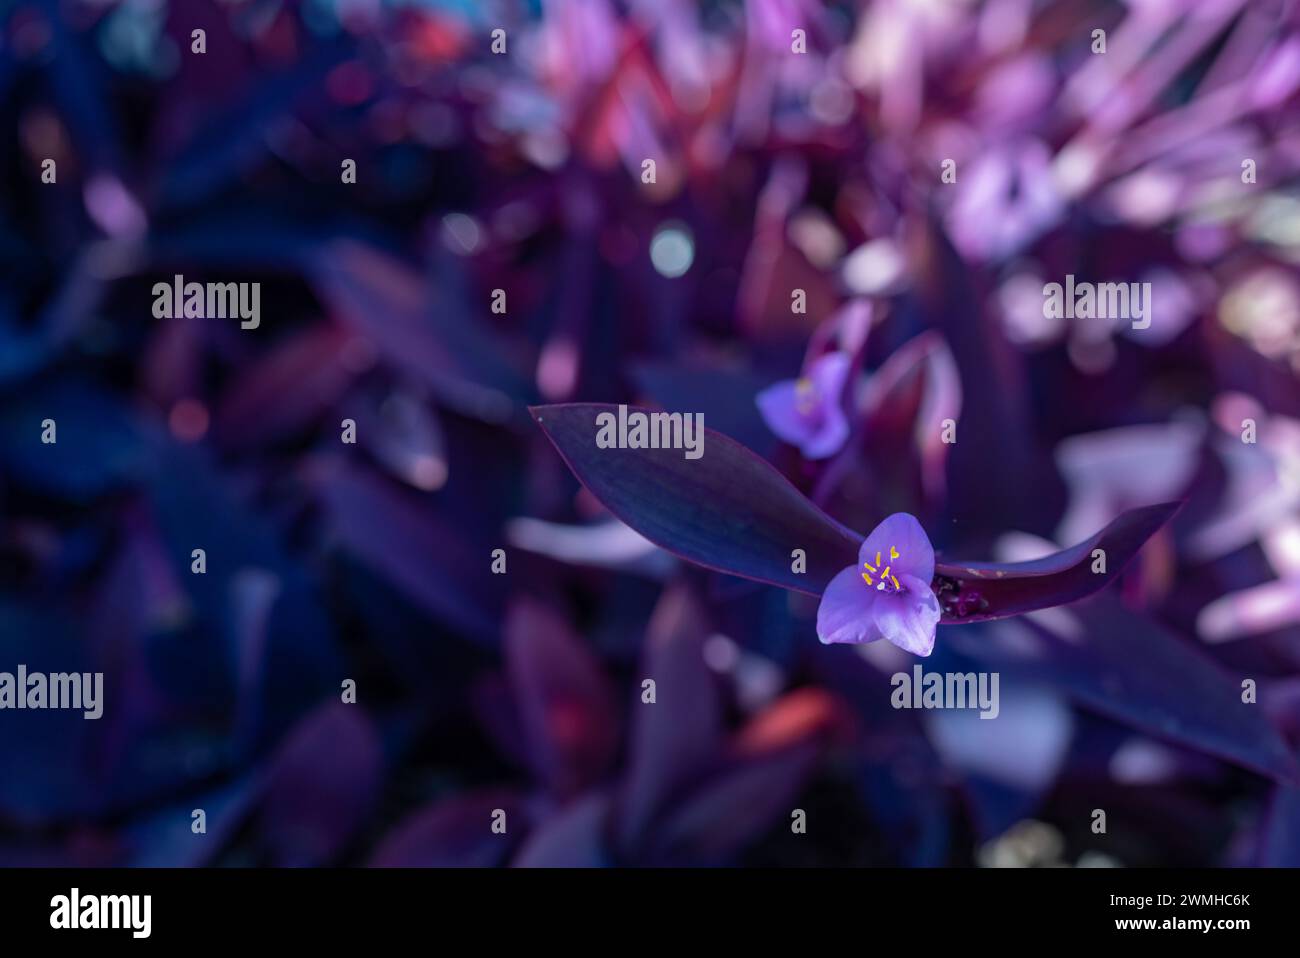 Blurred purple heart plant. Purple leaves background with a pink flower closeup Stock Photo